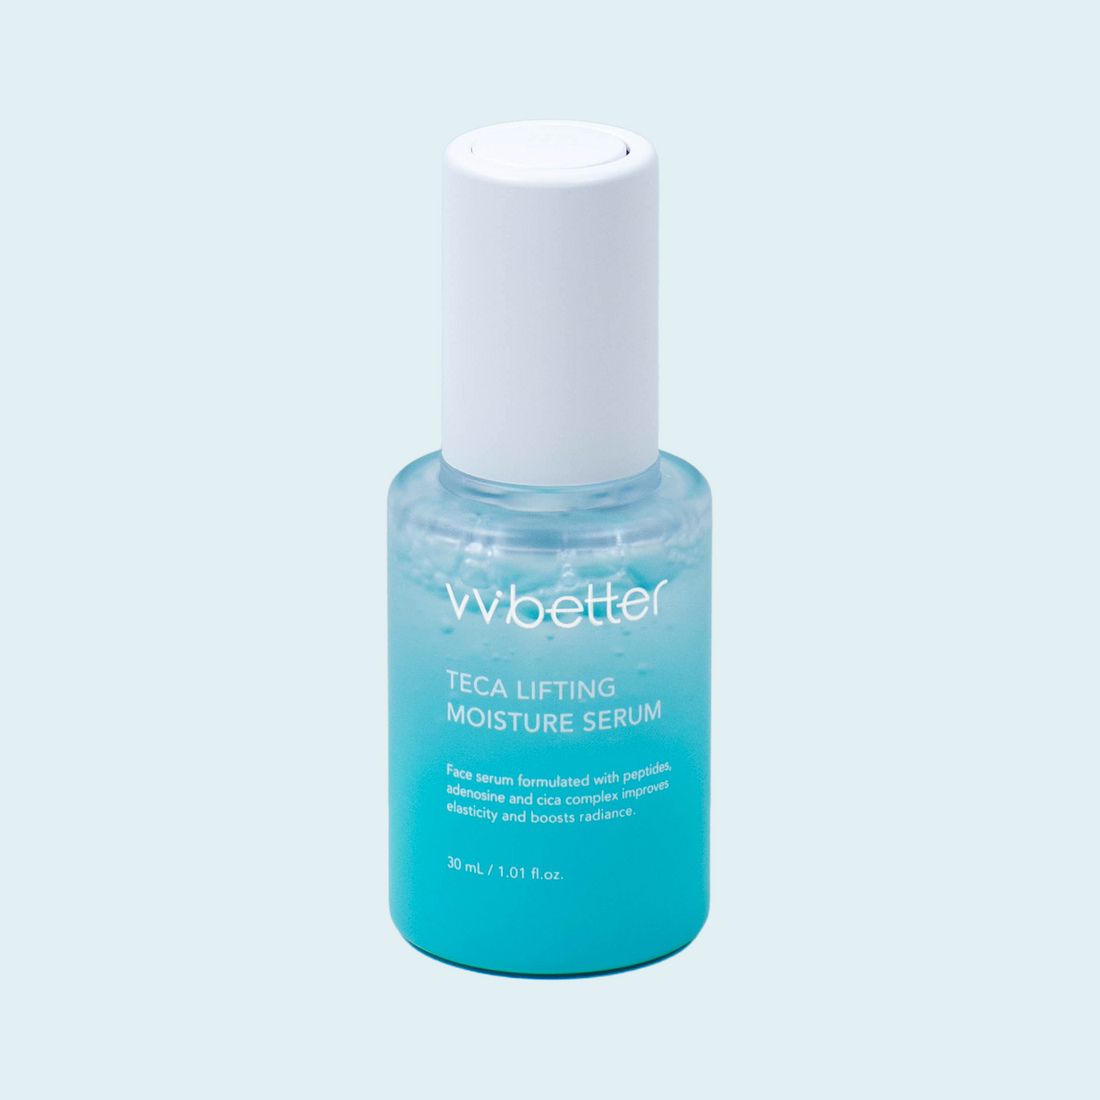 Teca Lifting Mositure Serum by Vvbetter